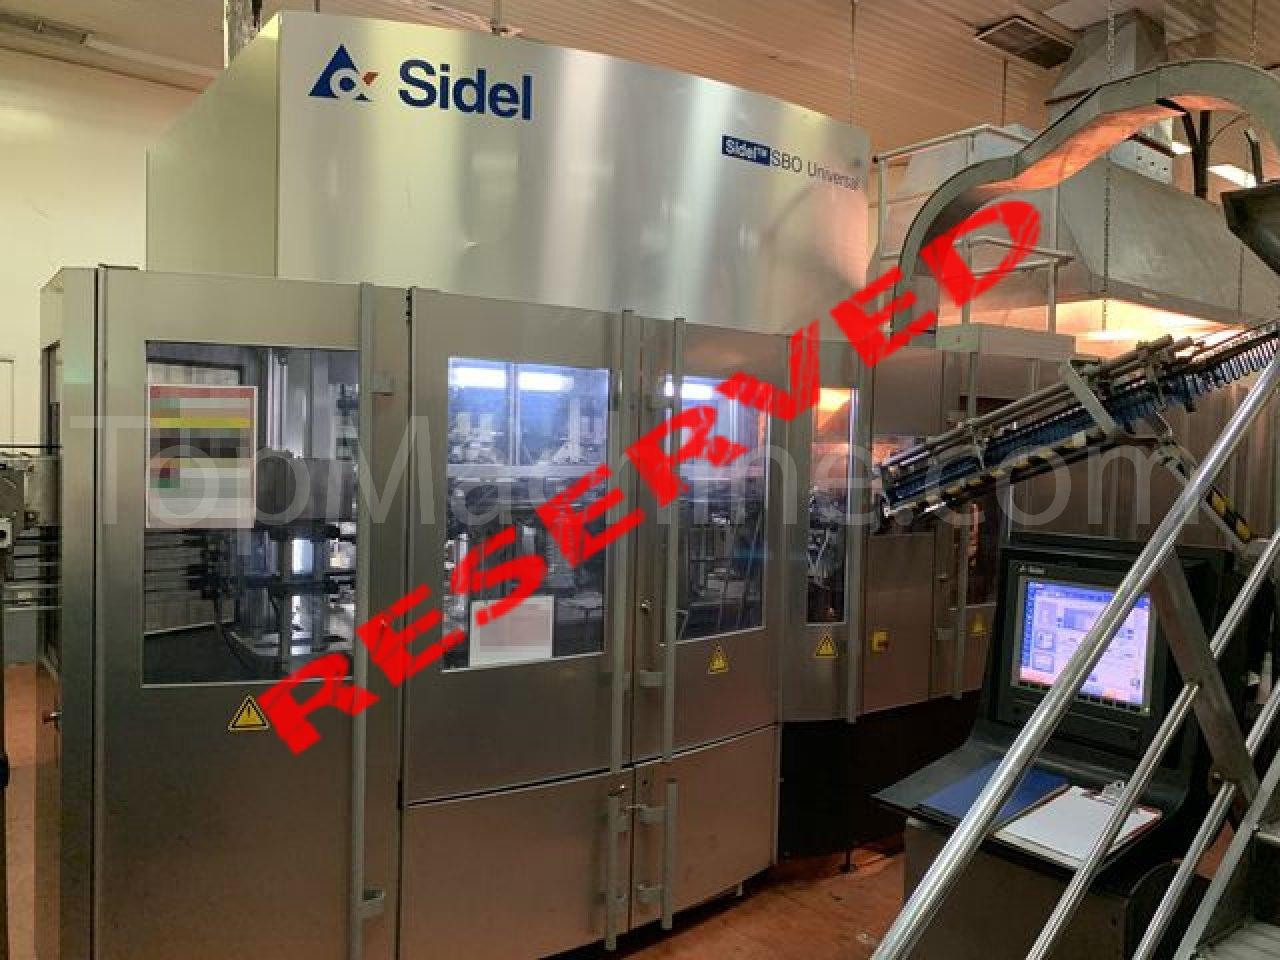 Used Sidel SBO 10 /14 Universal Bottles, PET Preforms & Closures PET Stretch Blow Molding